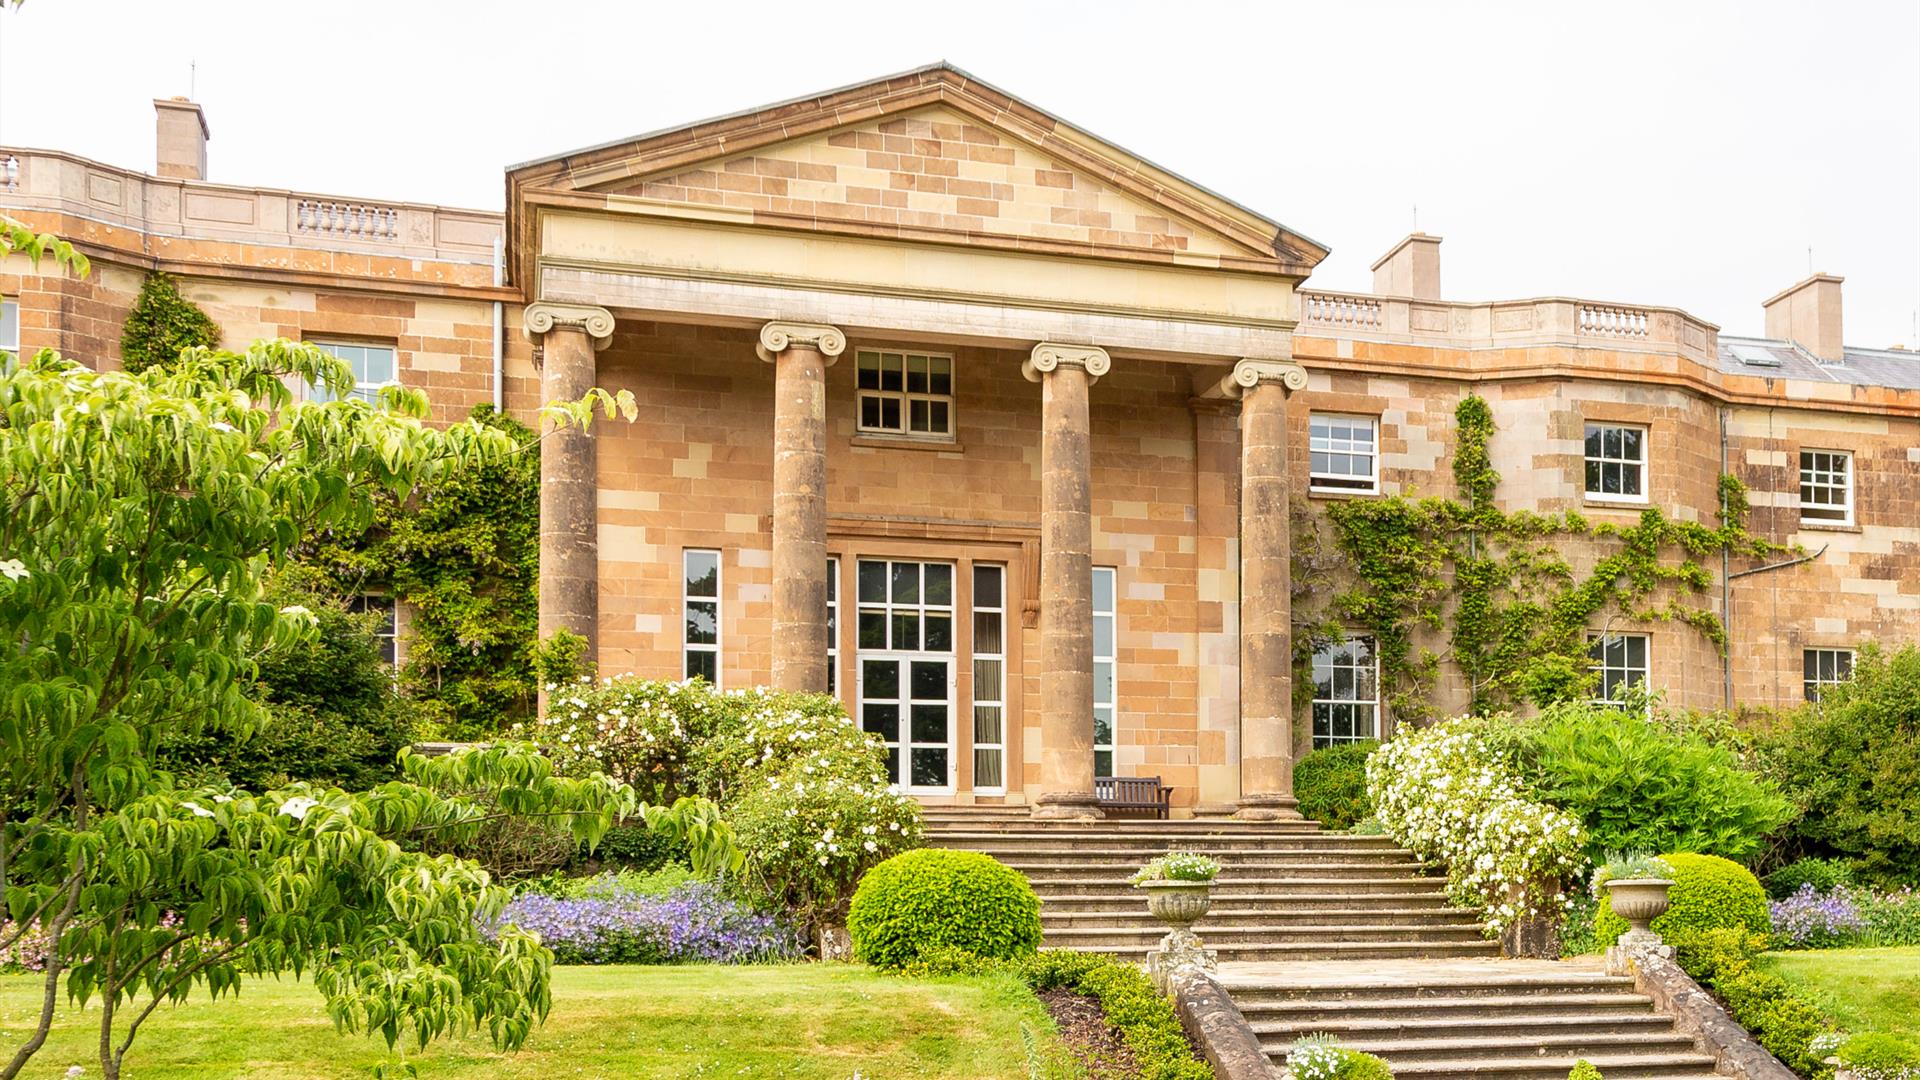 View of Hillsborough Castle and gardens